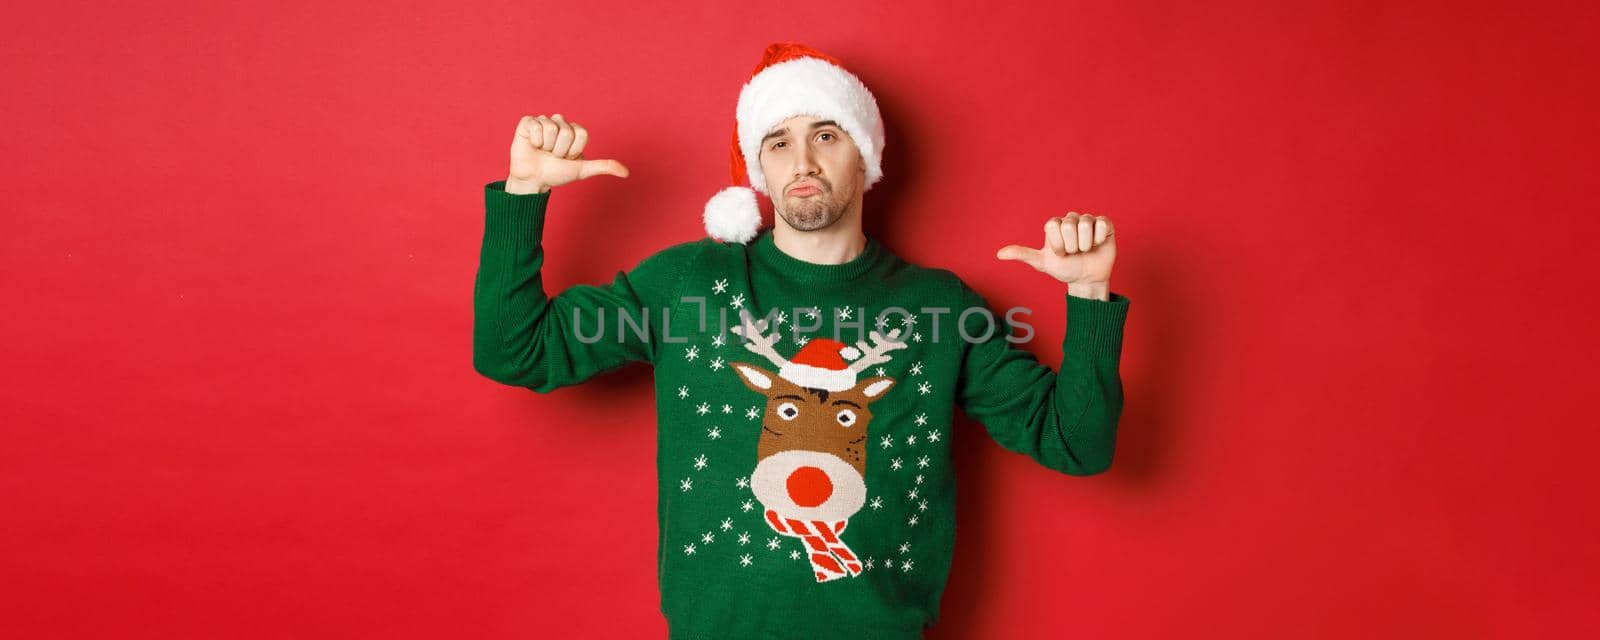 Image of handsome and confident young man in green sweater and santa hat, pointing at himself, celebrating christmas, standing over red background.